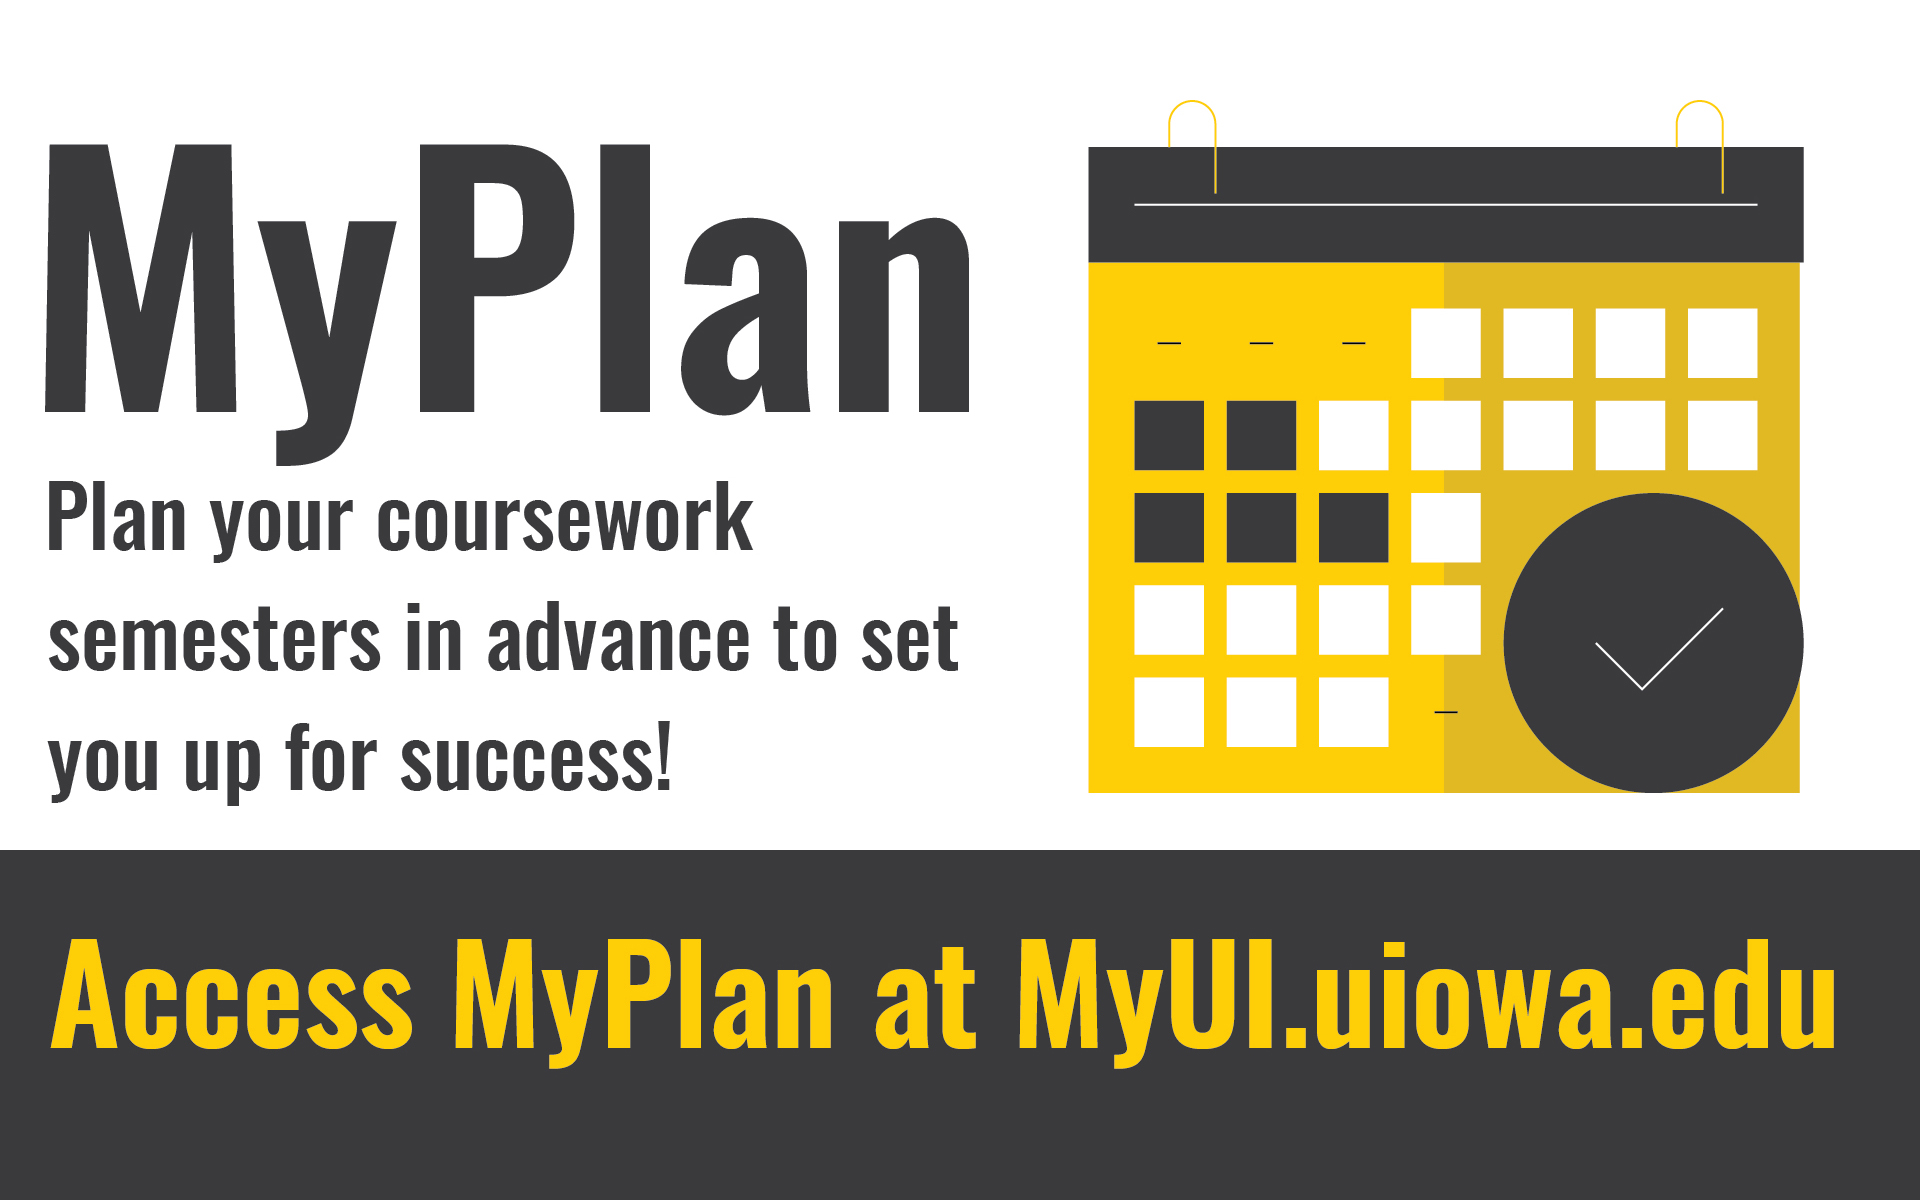 My Plan. Plan your coursework semesters in advance to set you up for success! Access MyPlan at MyUI.uiowa.edu.